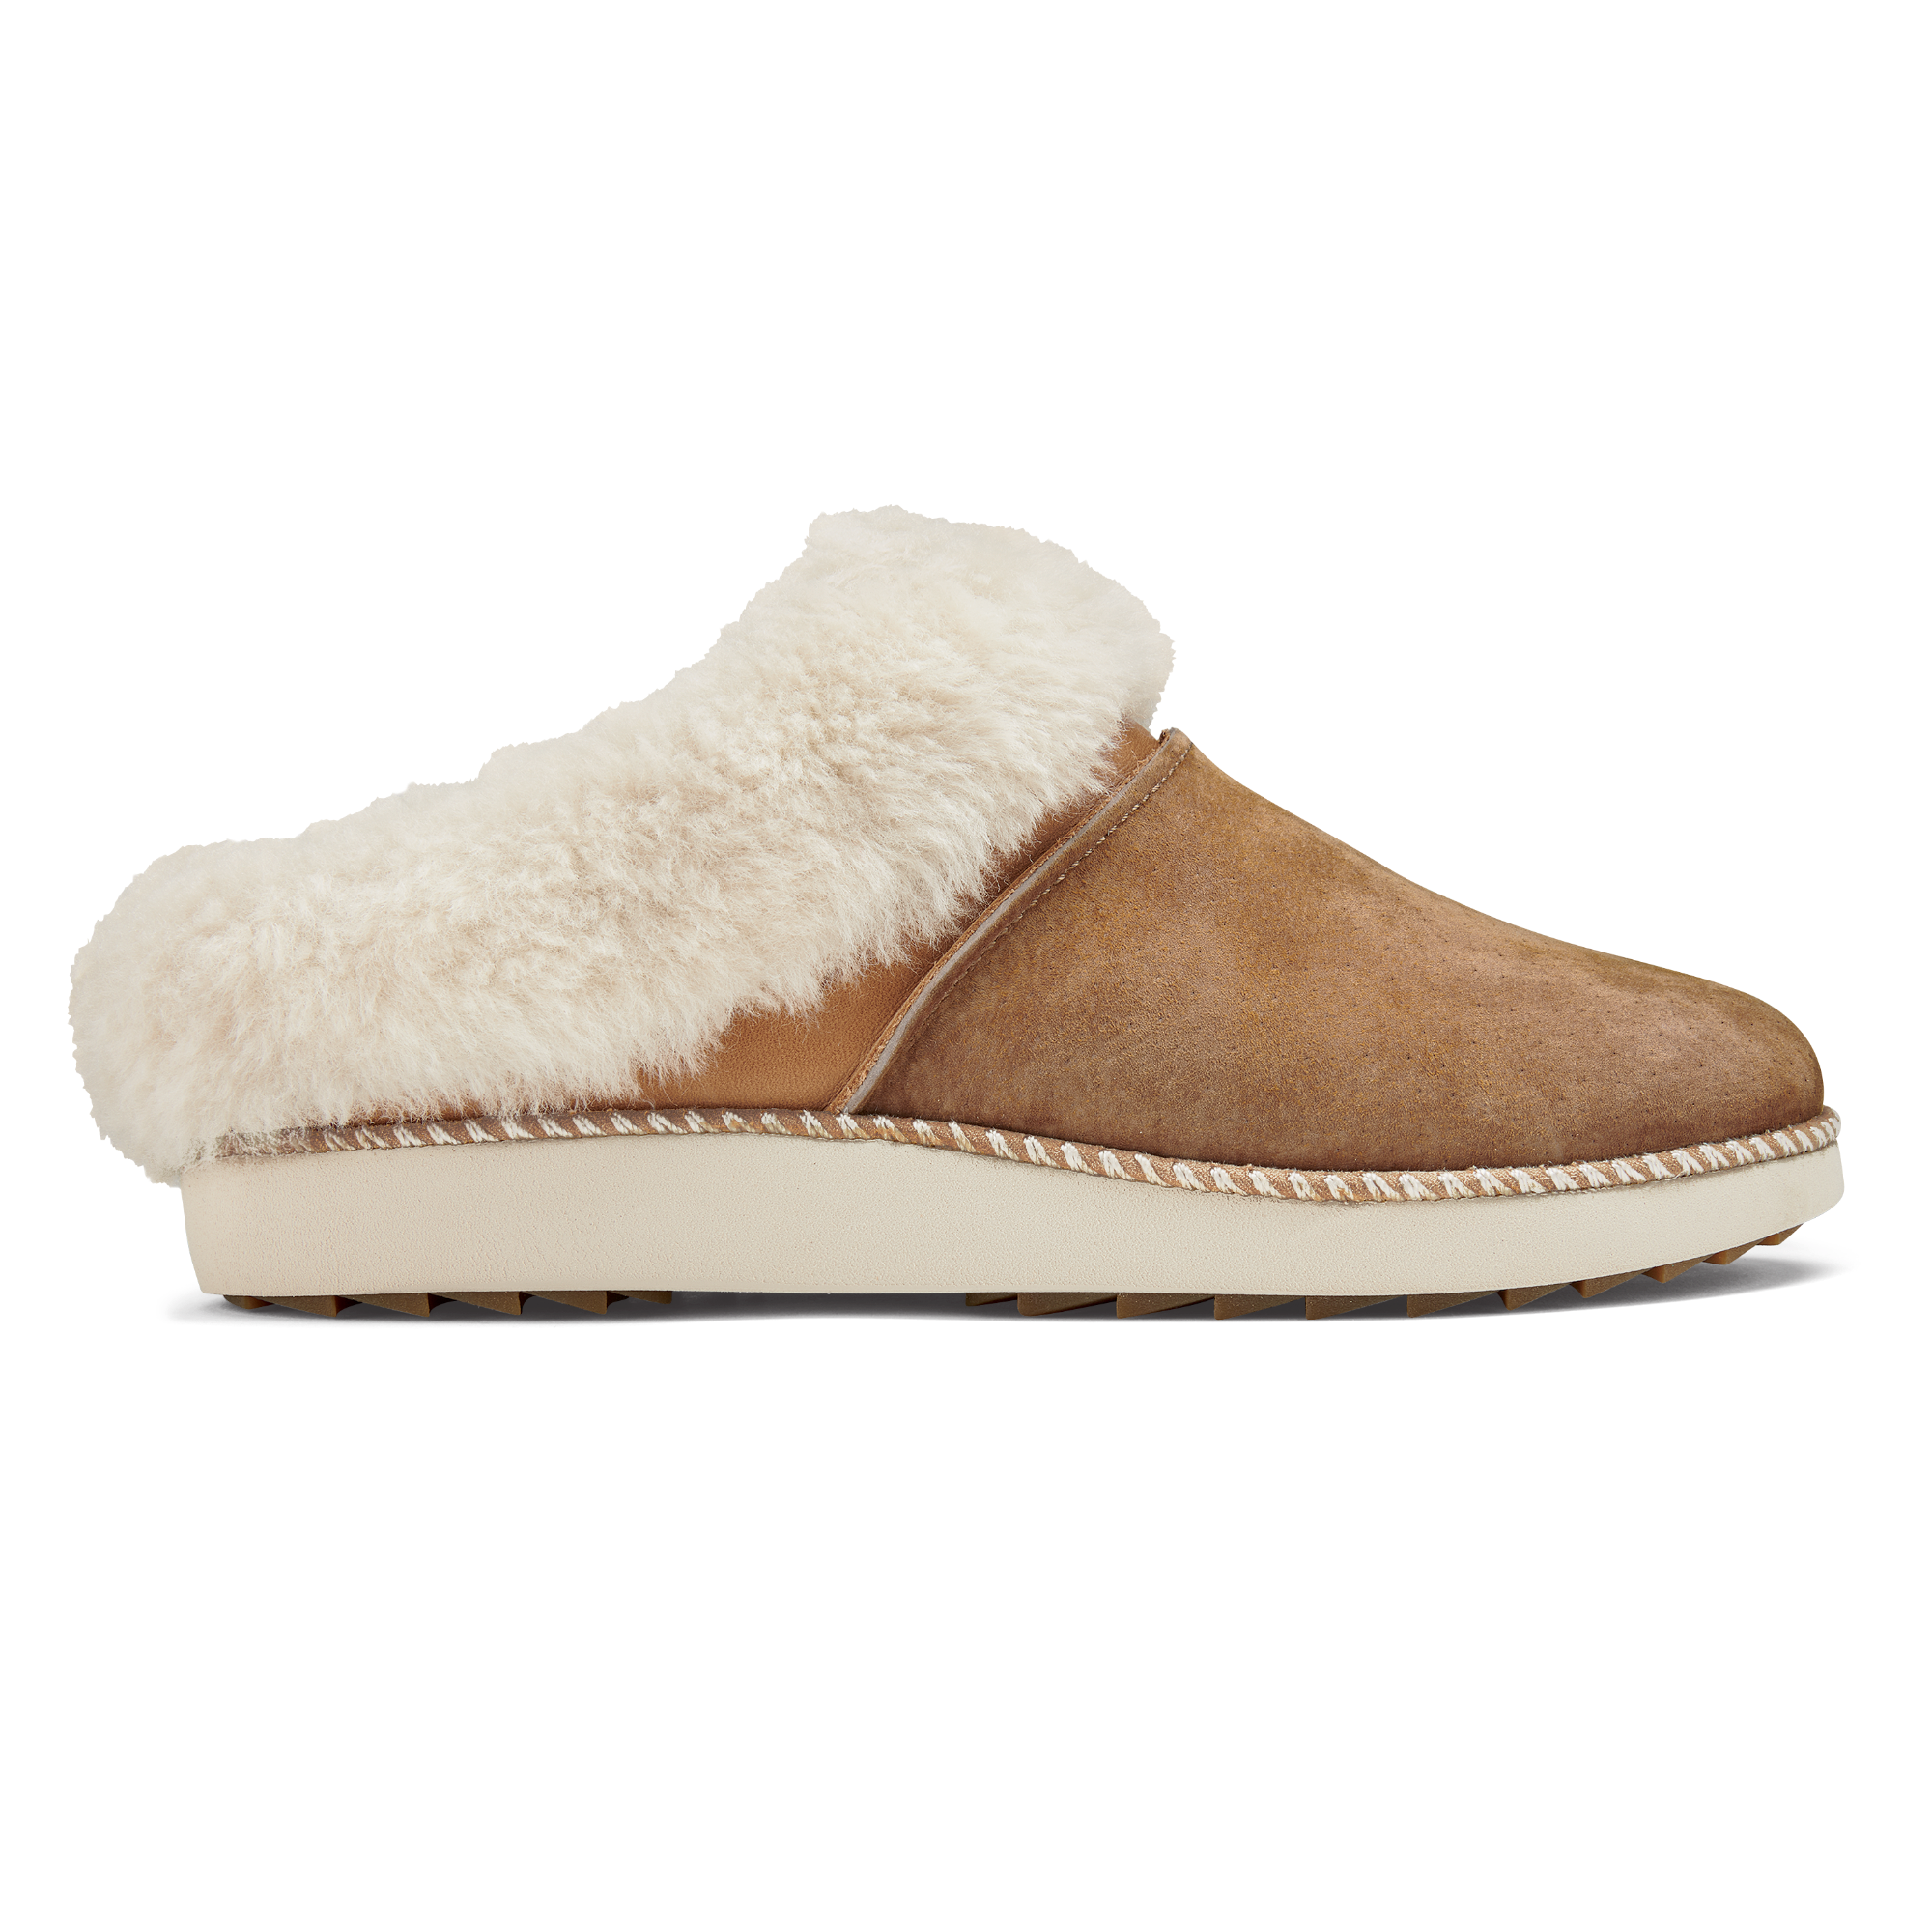 Comfortable Shearling Shoes and Slippers For Women